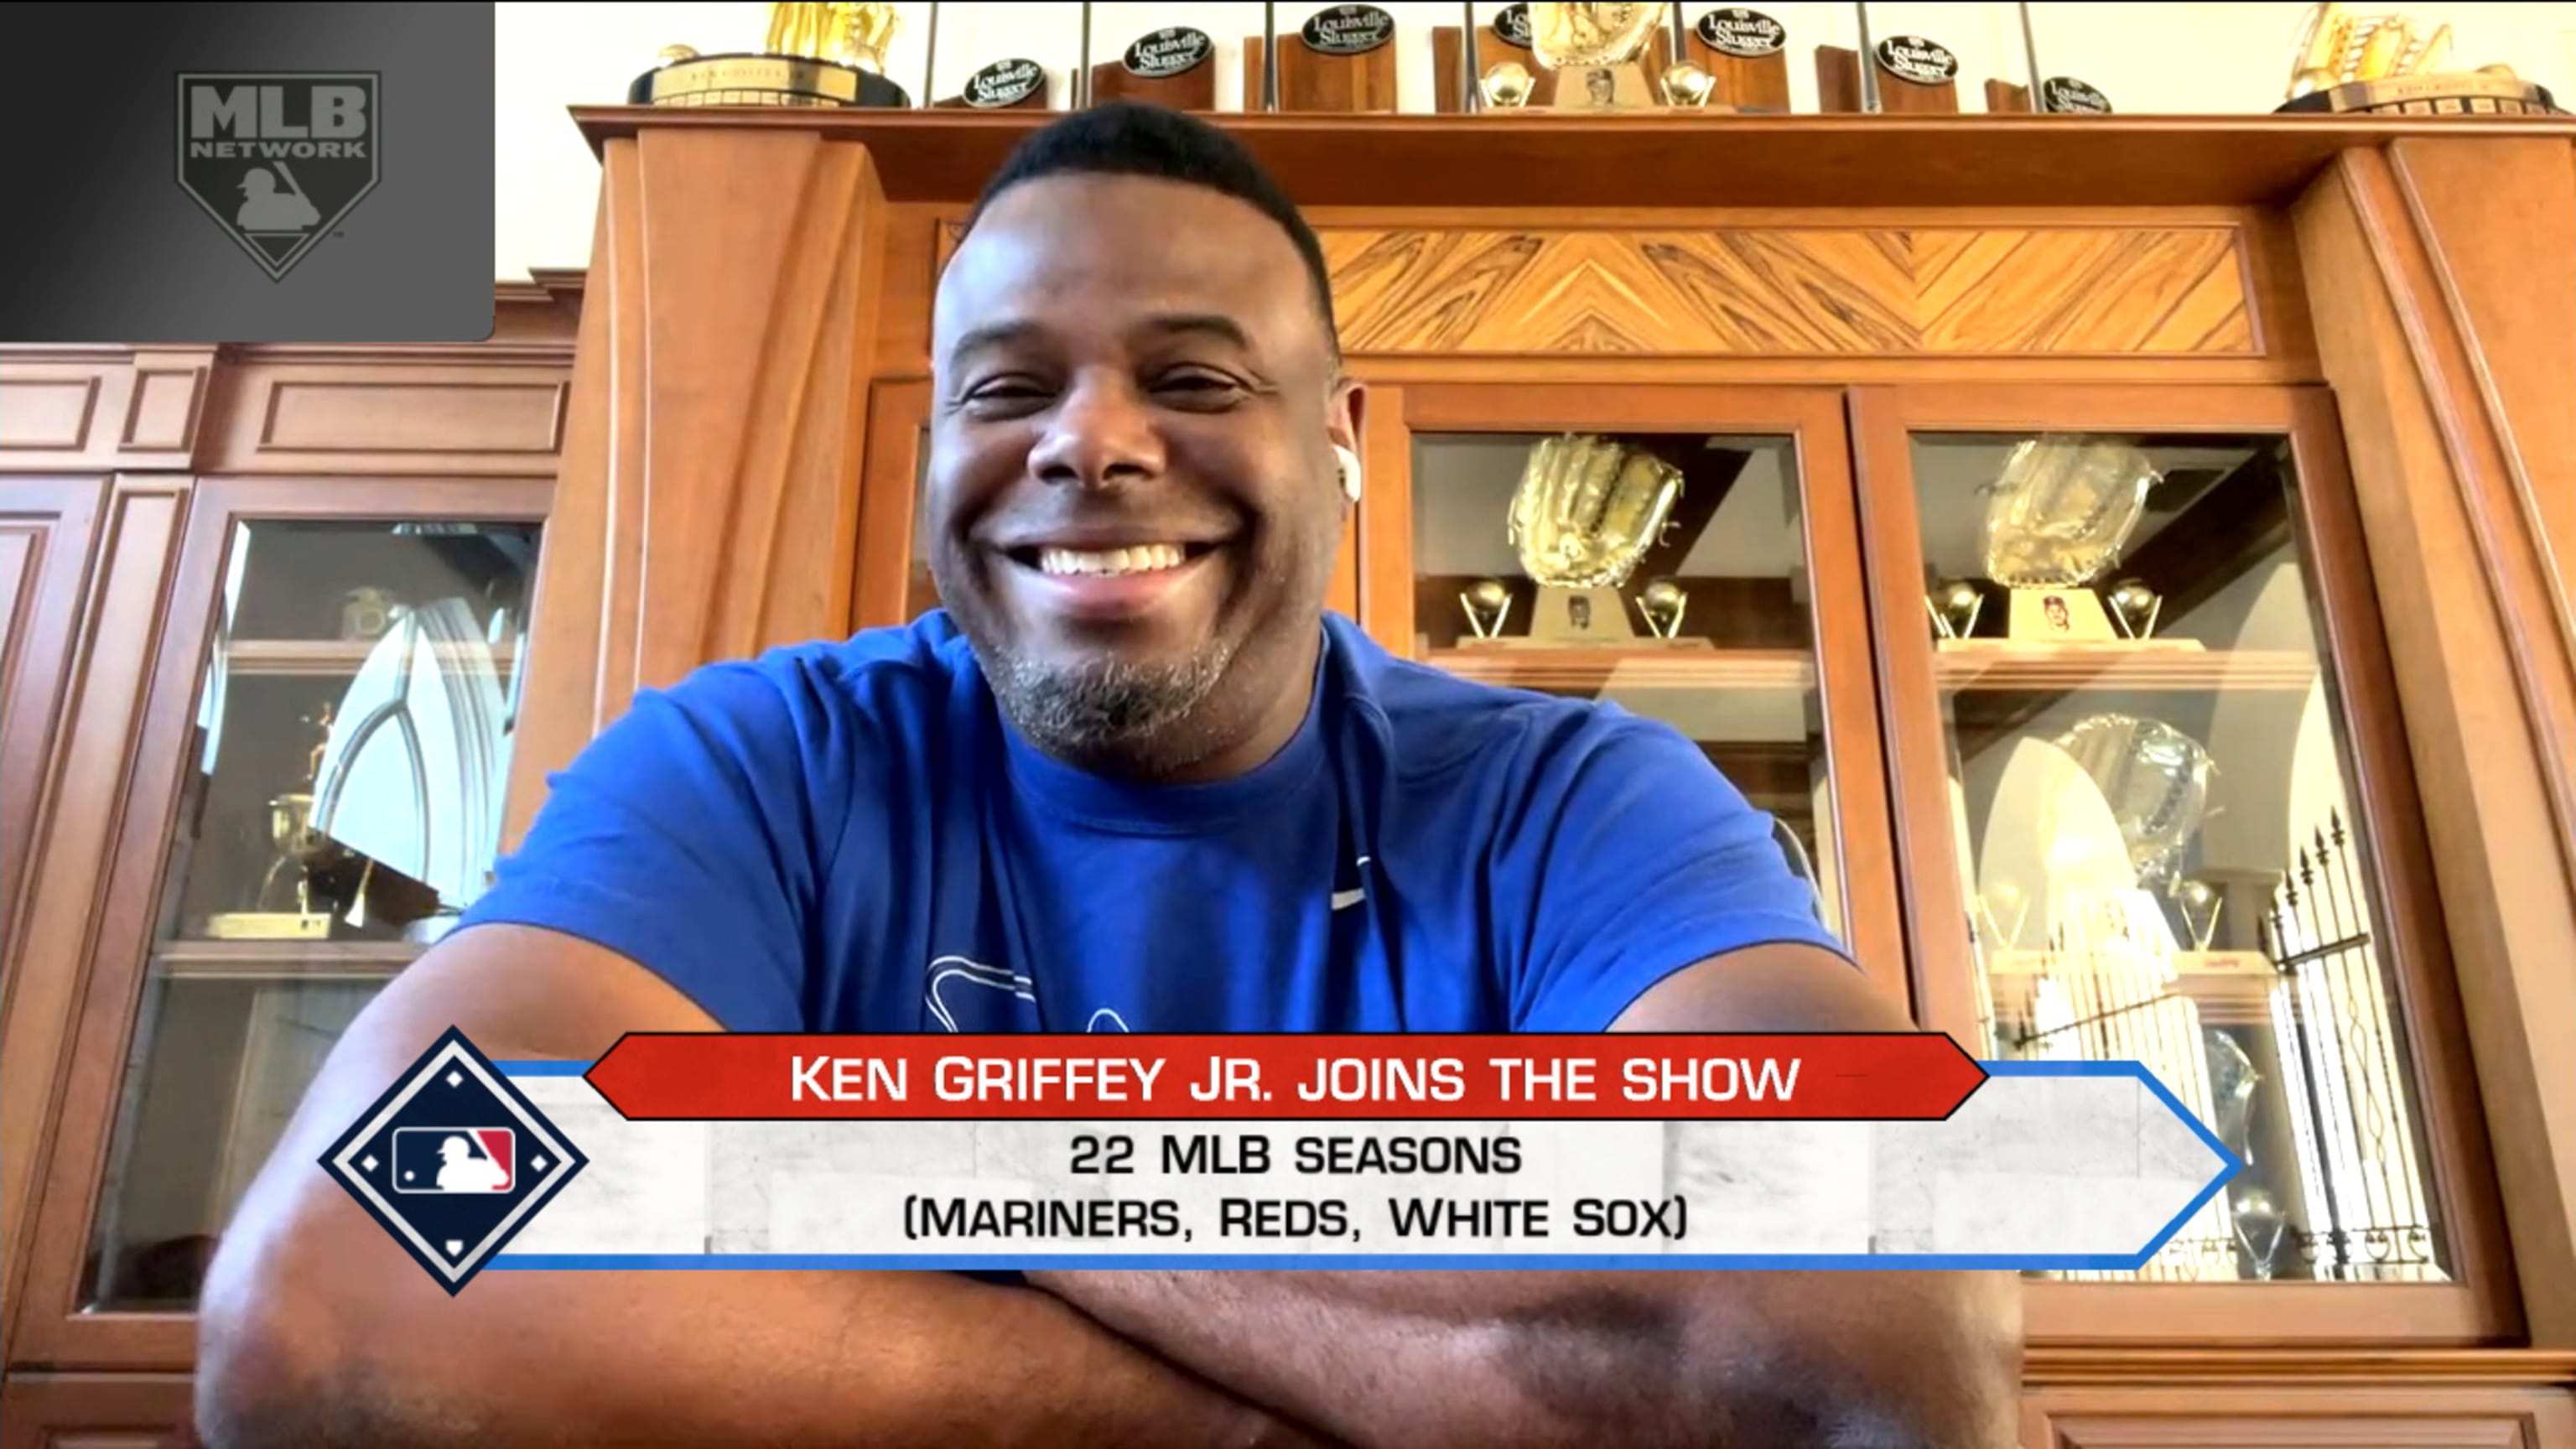 Ken Griffey Jr. on his new role